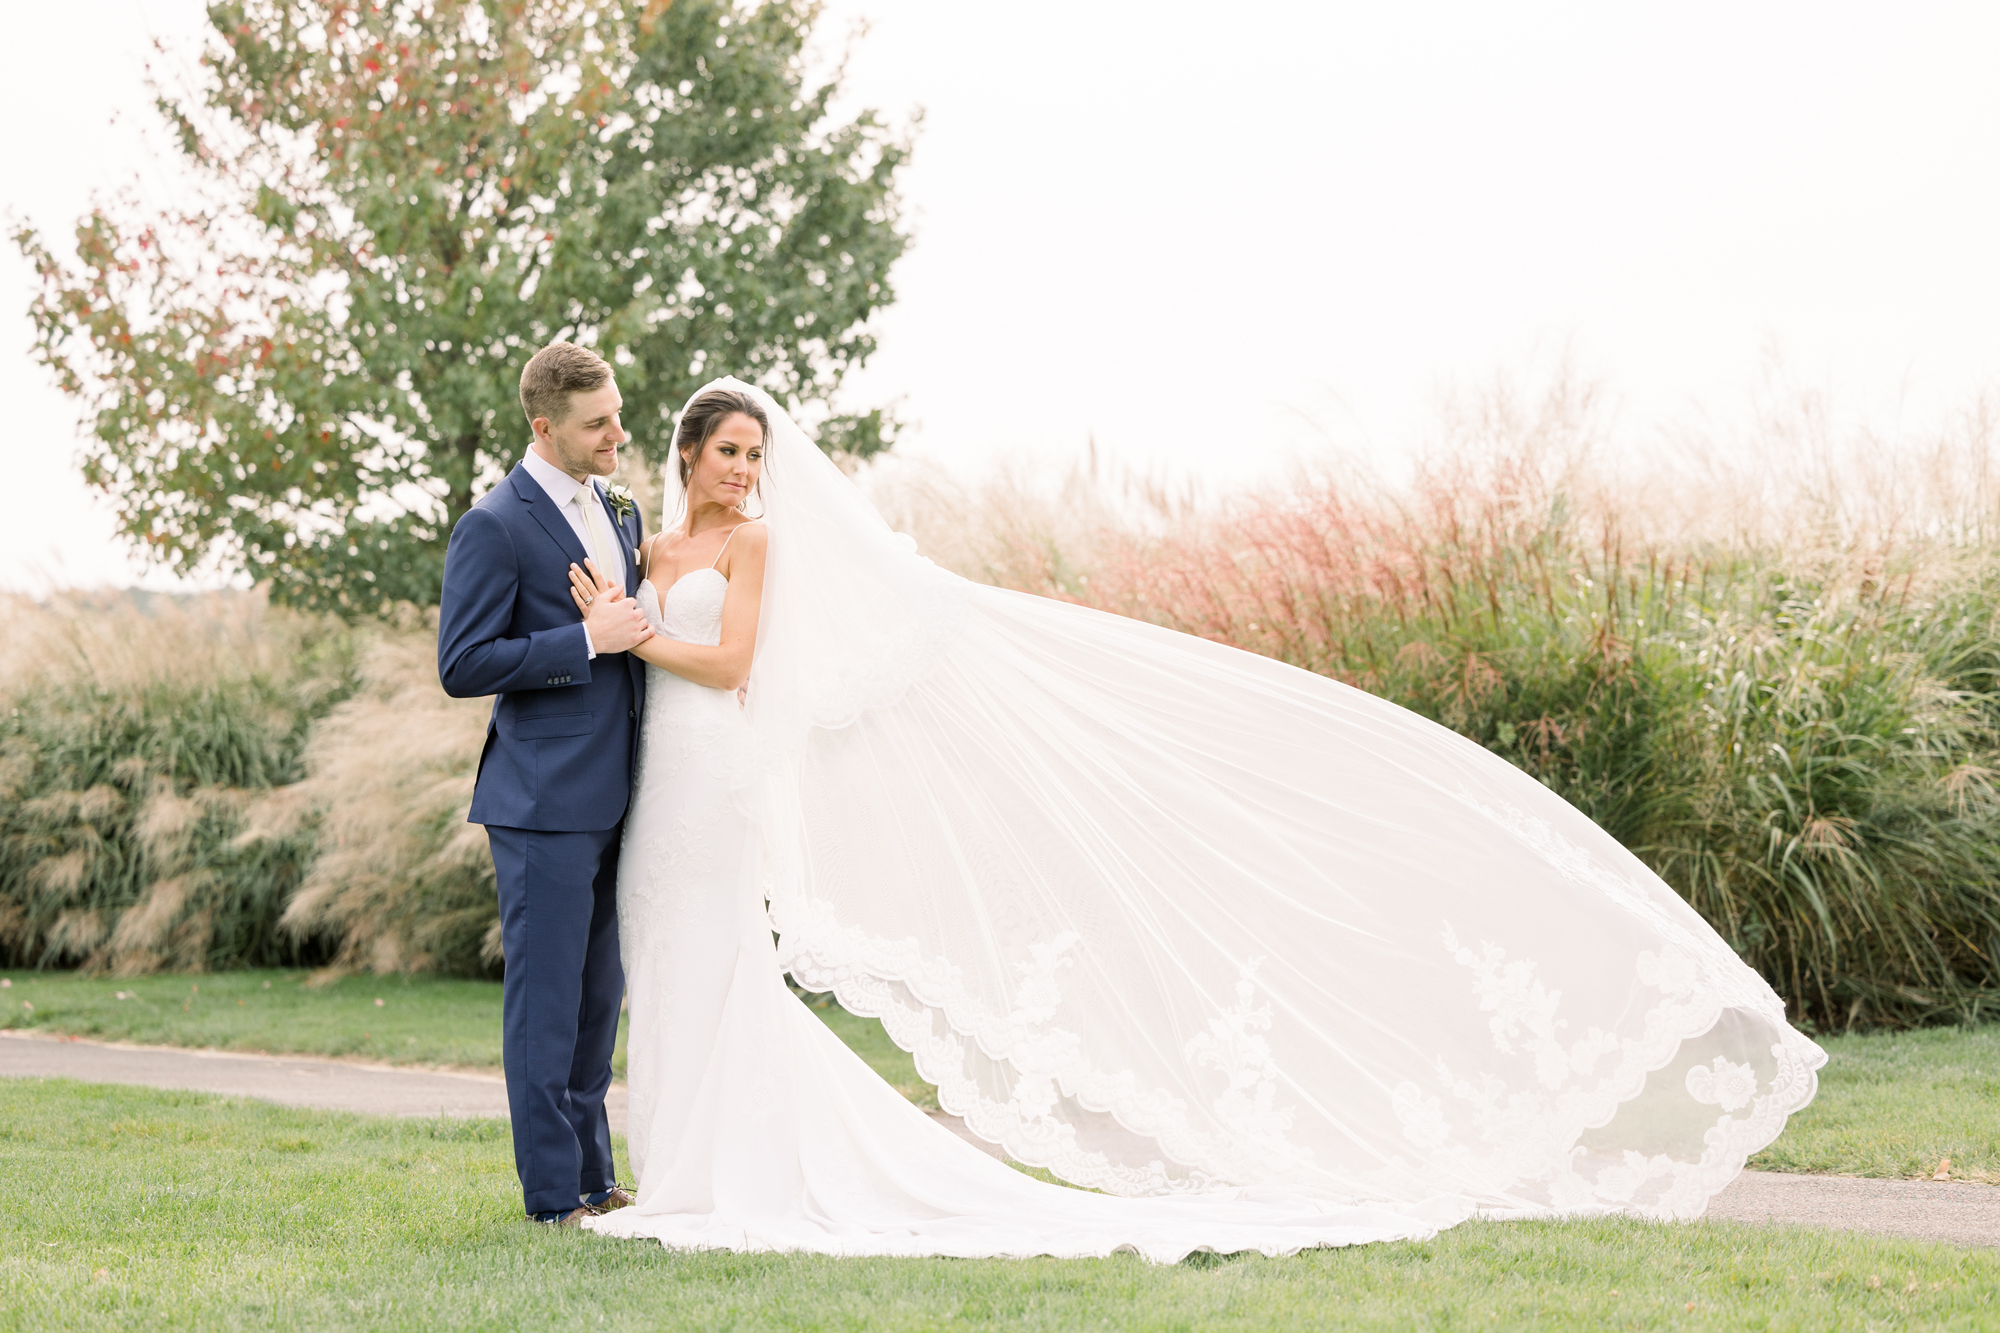 Plan a Wedding at the Indian Trail Club in Franklin Lakes, NJ